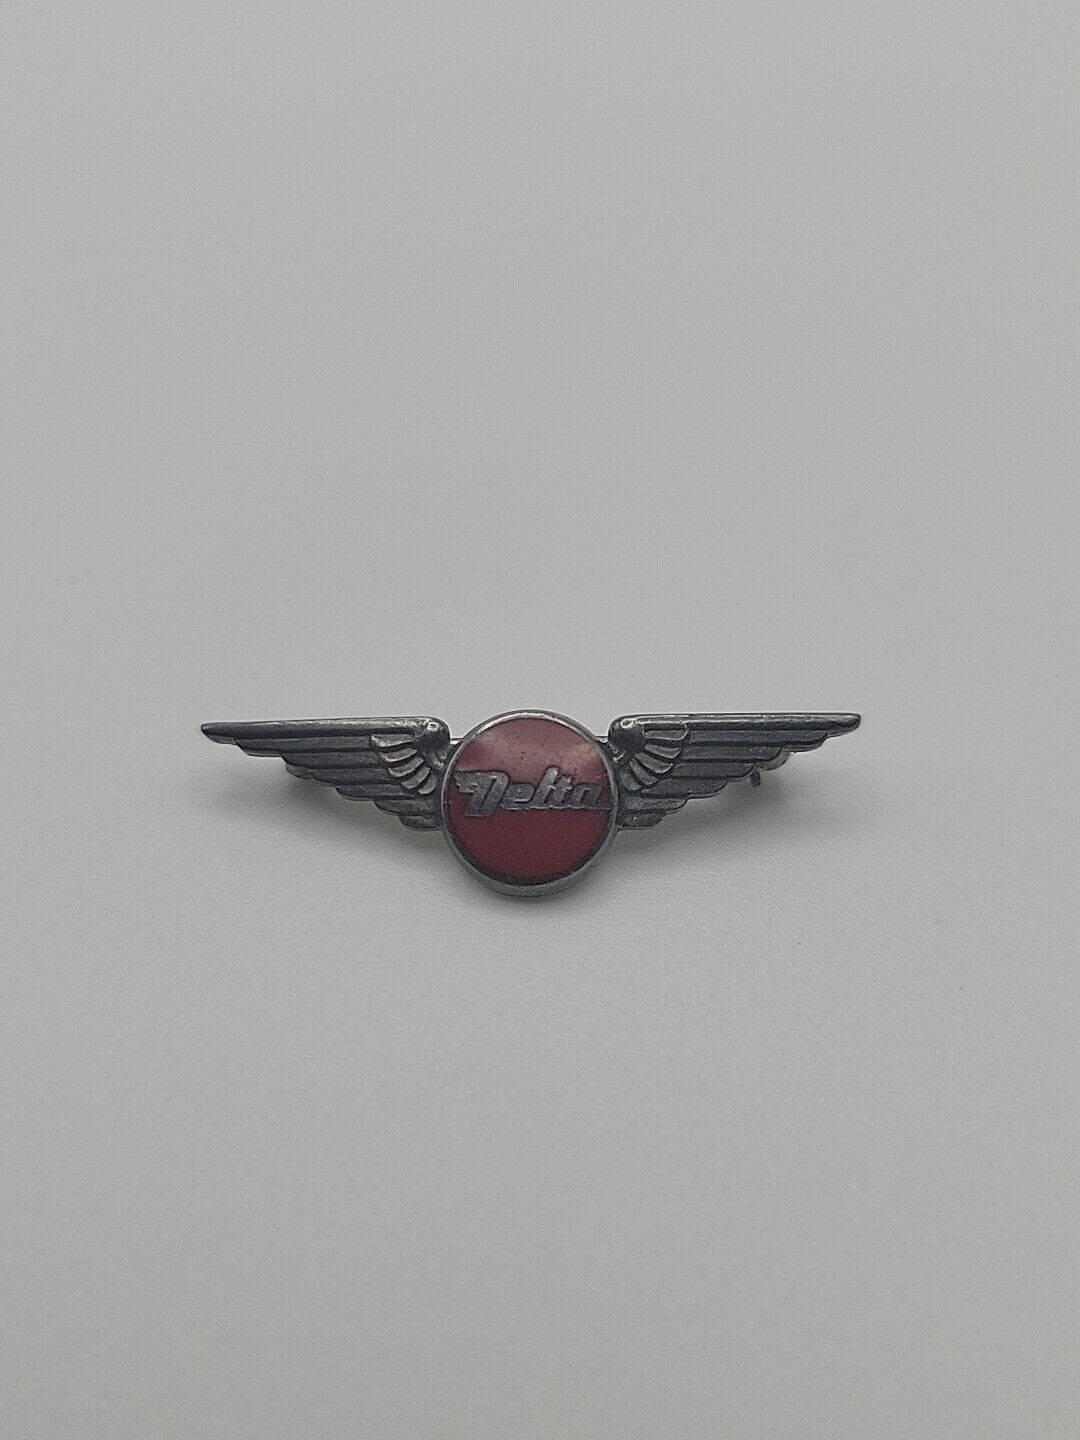 Vintage Delta Air Lines 50’s-60’s Sterling Silver Flight Attendant Employee Pin